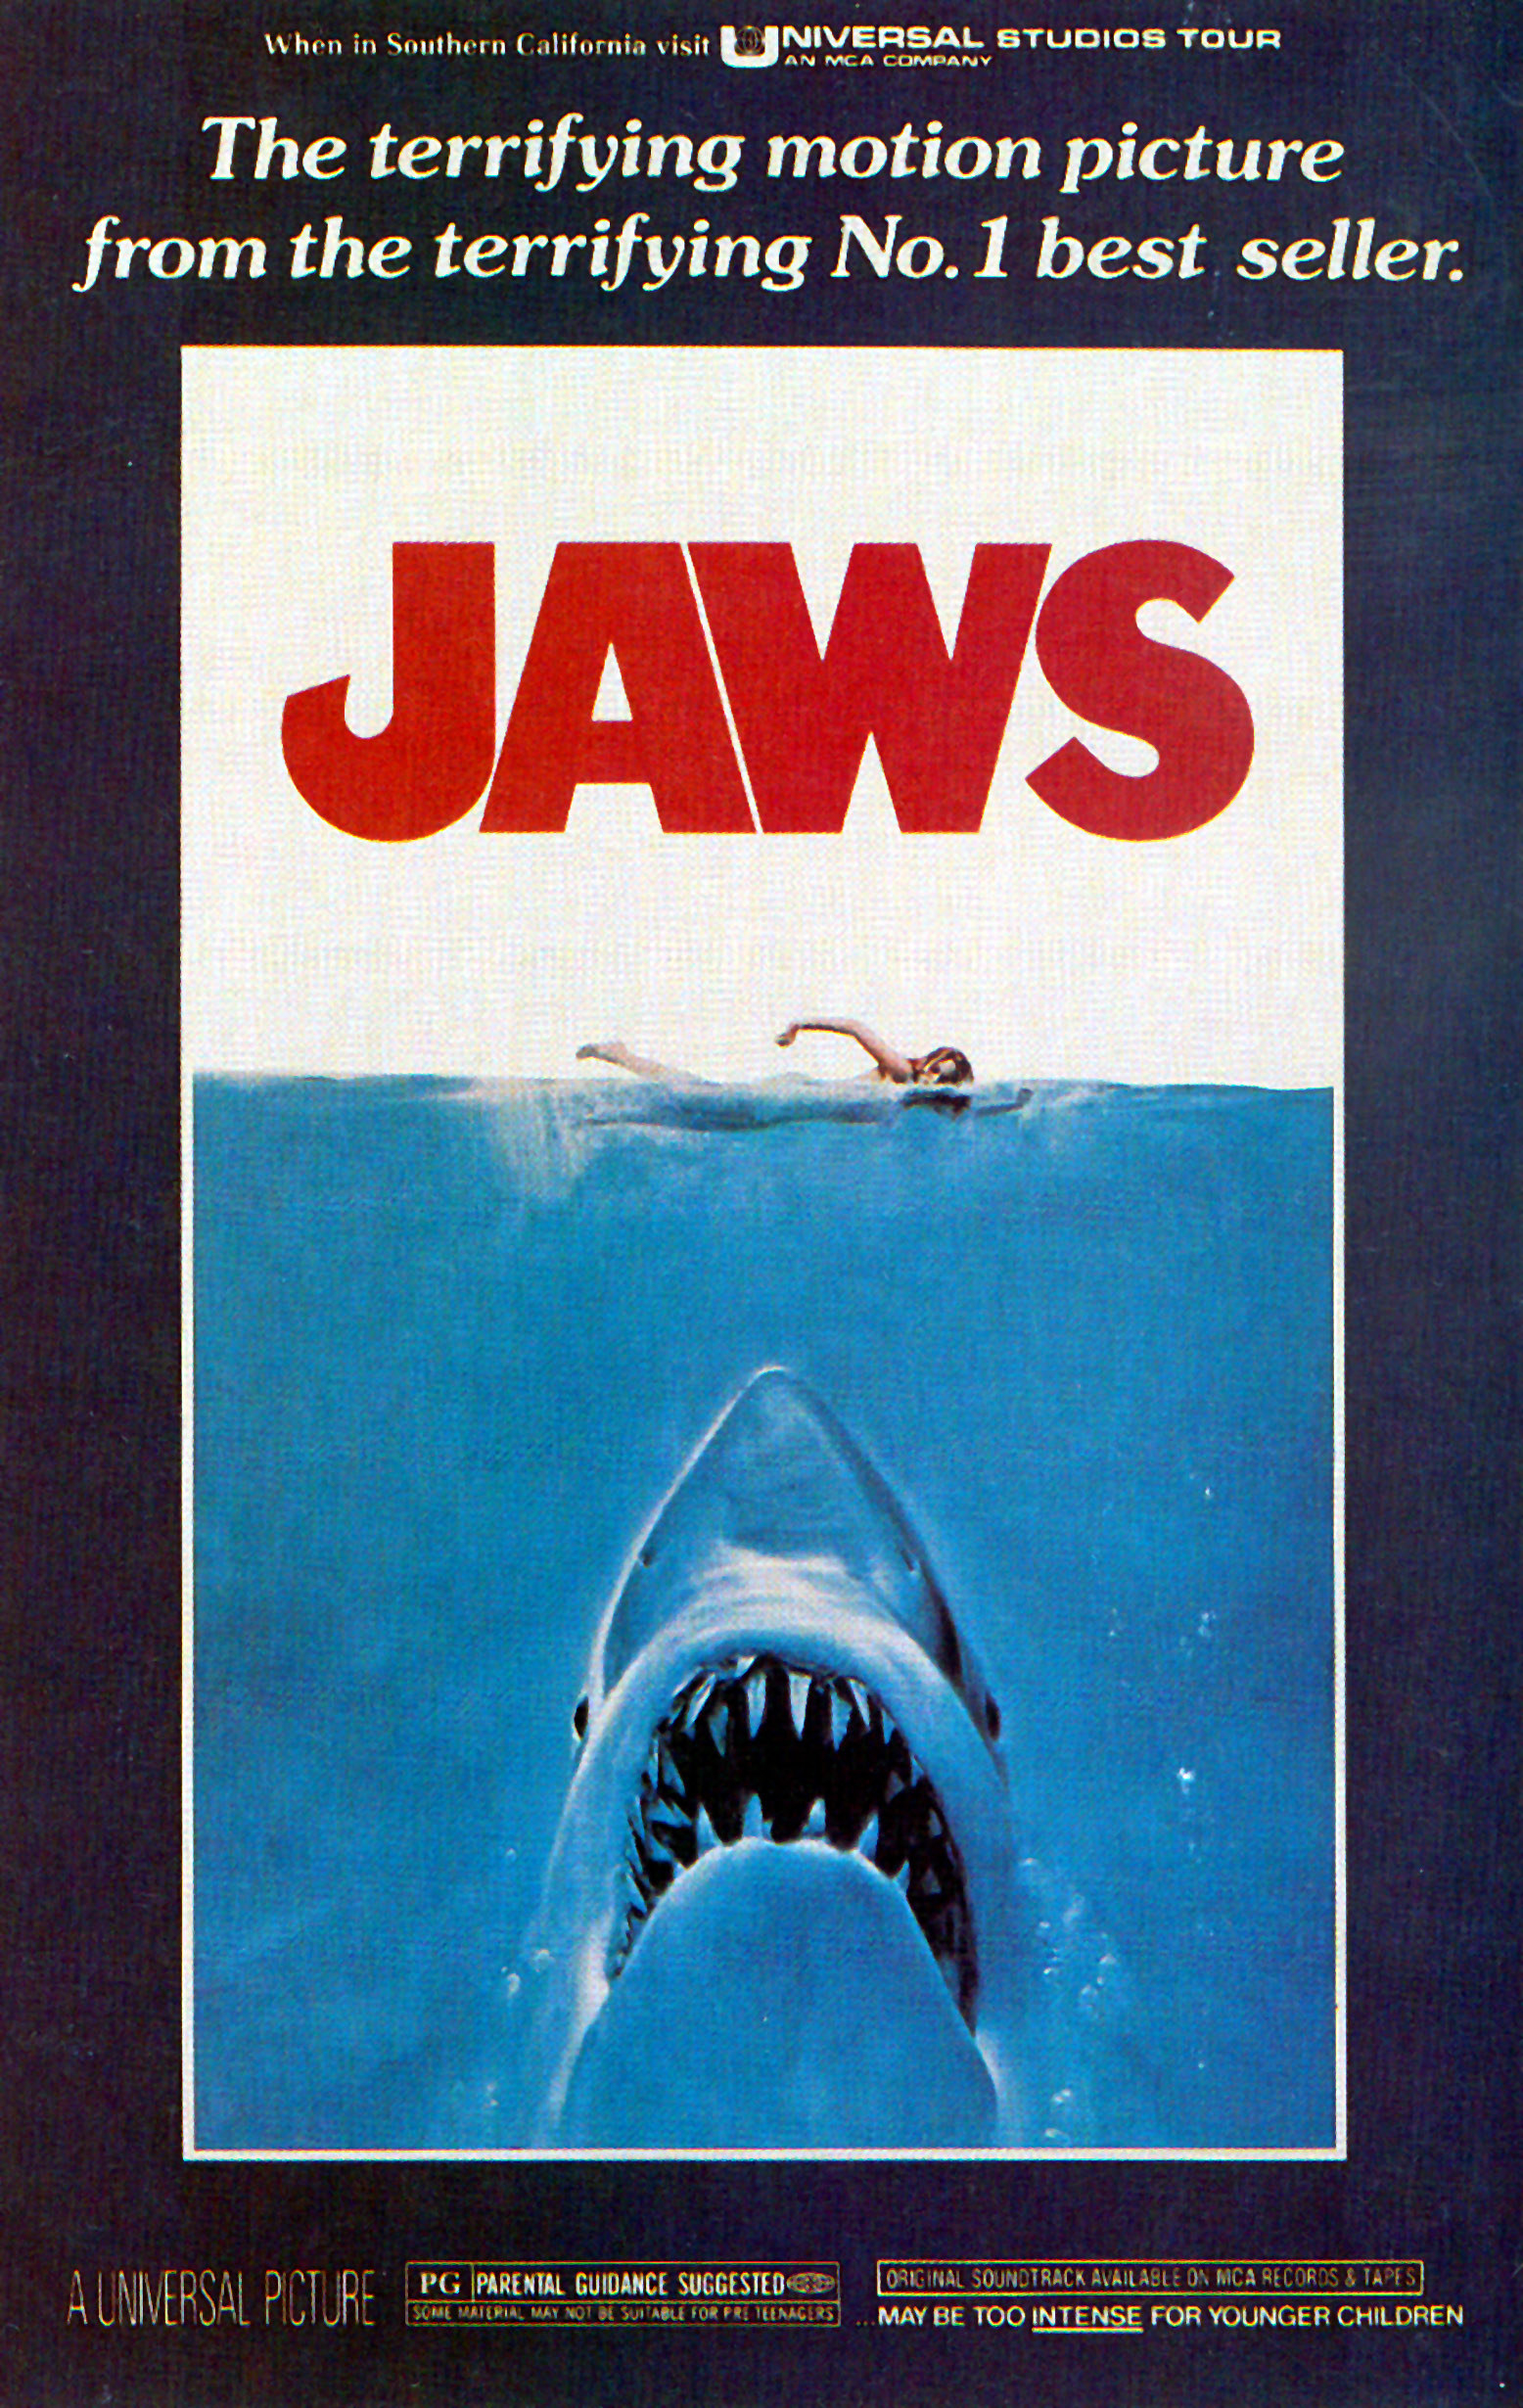 The official &quot;Jaws&quot; poster that features a young woman swimming while a giant shark lurks just under the surface of the water